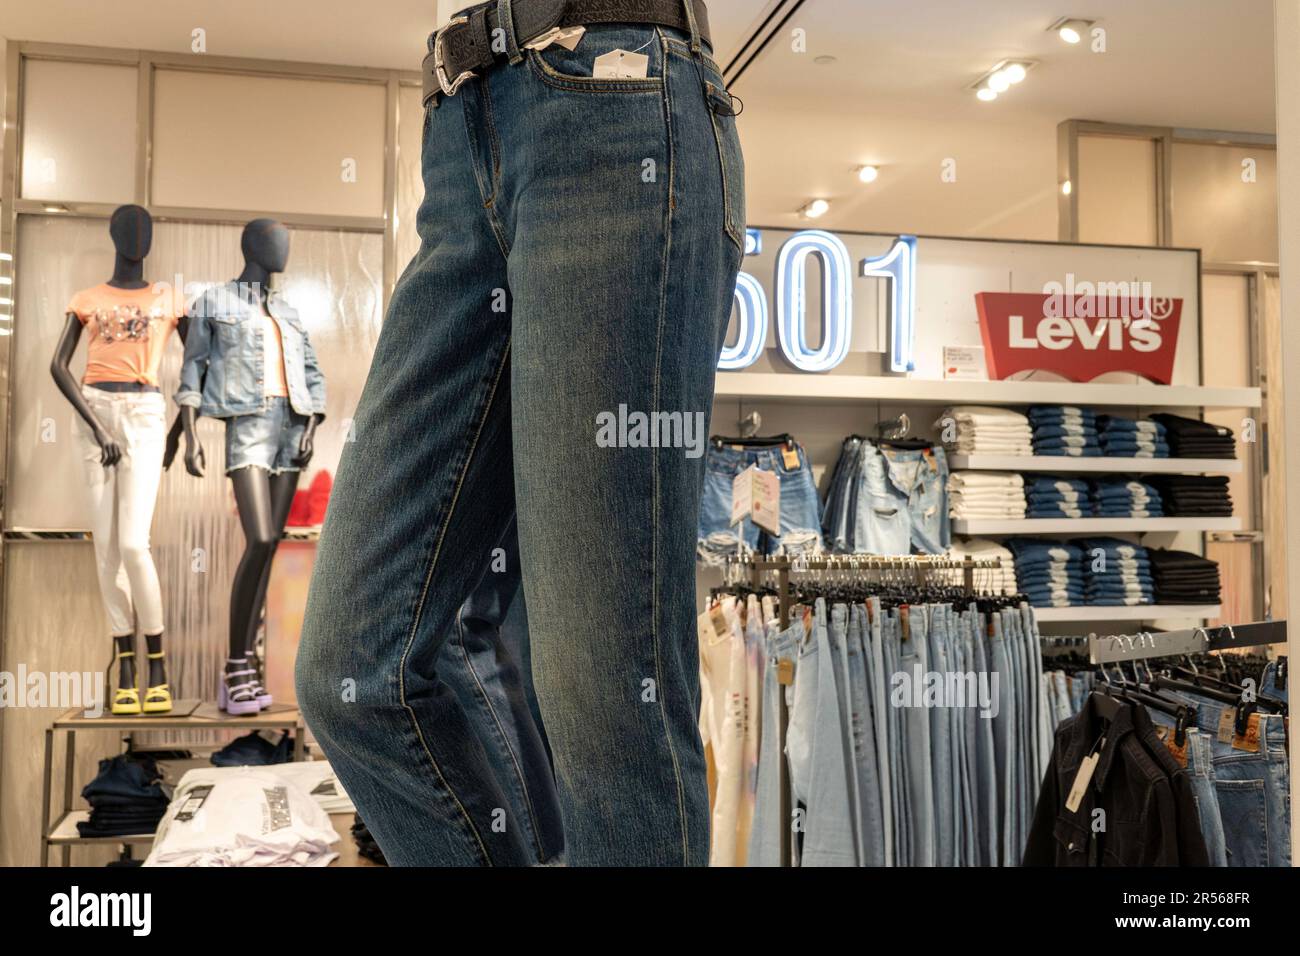 Levi store display stock photography and - Alamy